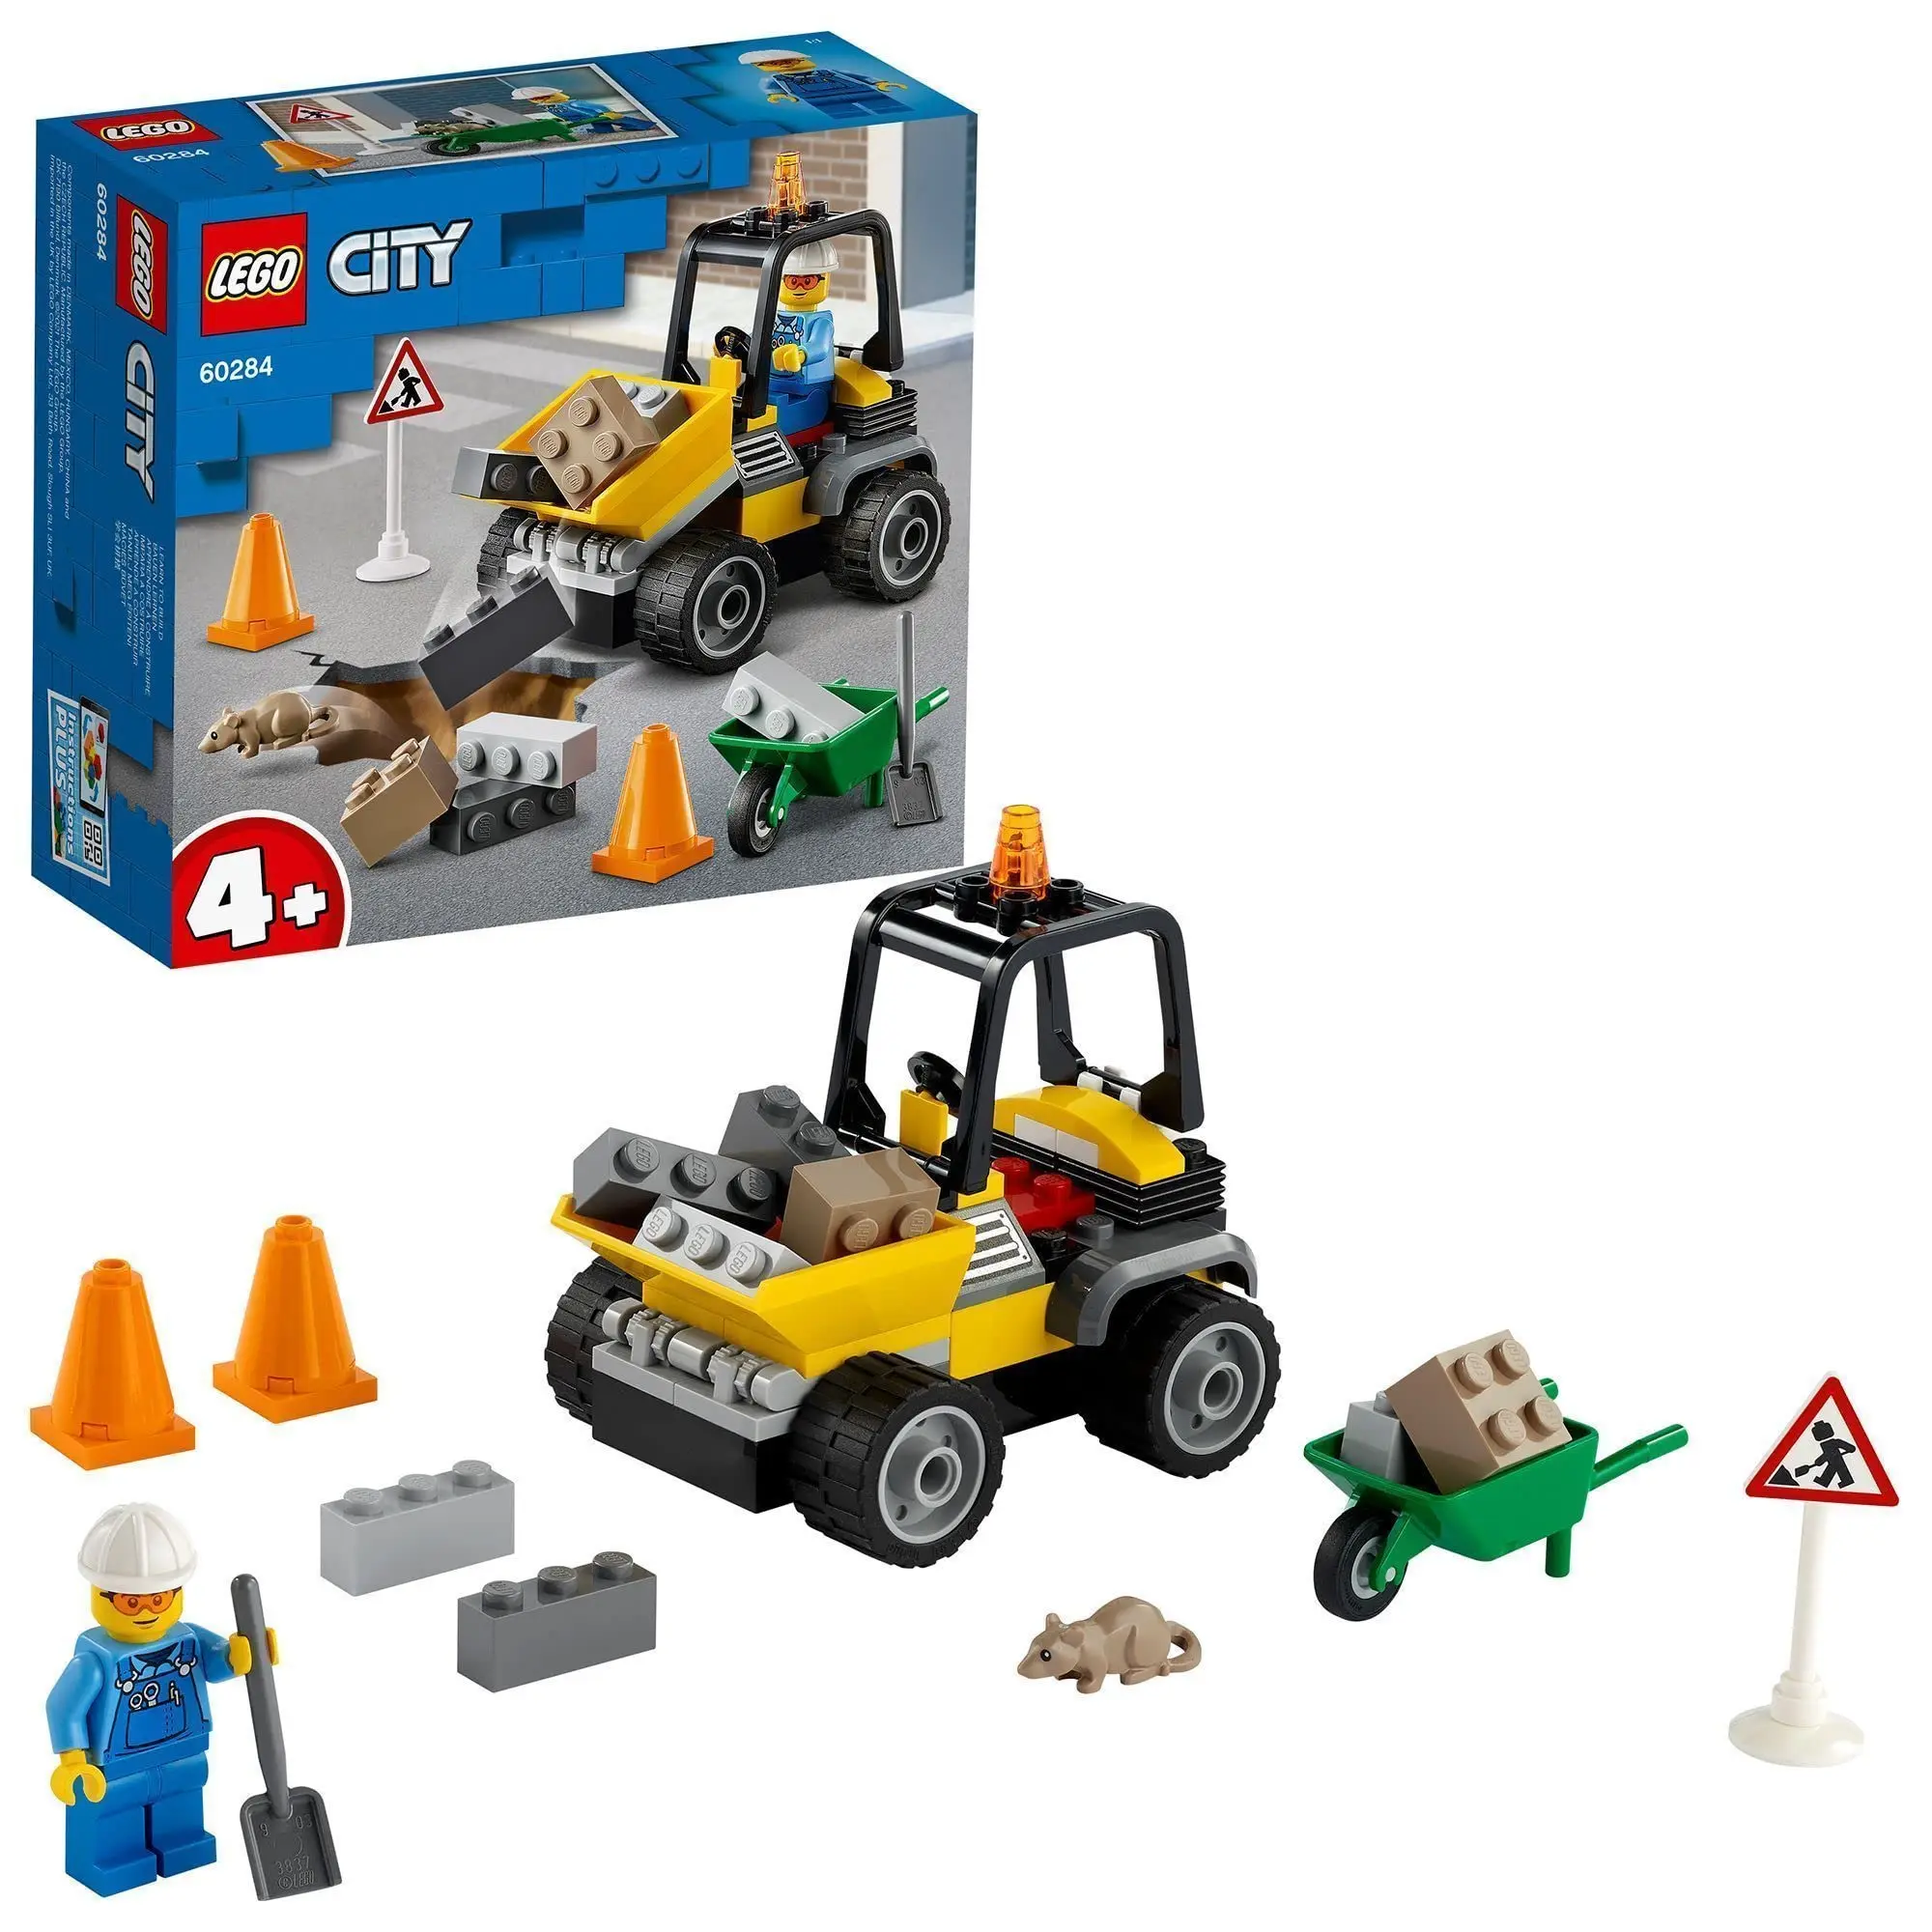 

LEGO 60284 City Great Vehicles Roadwork Truck Toy, Front-End Loader for 4+ Years Old Boys and Girls, Construction Vehicle Stocki